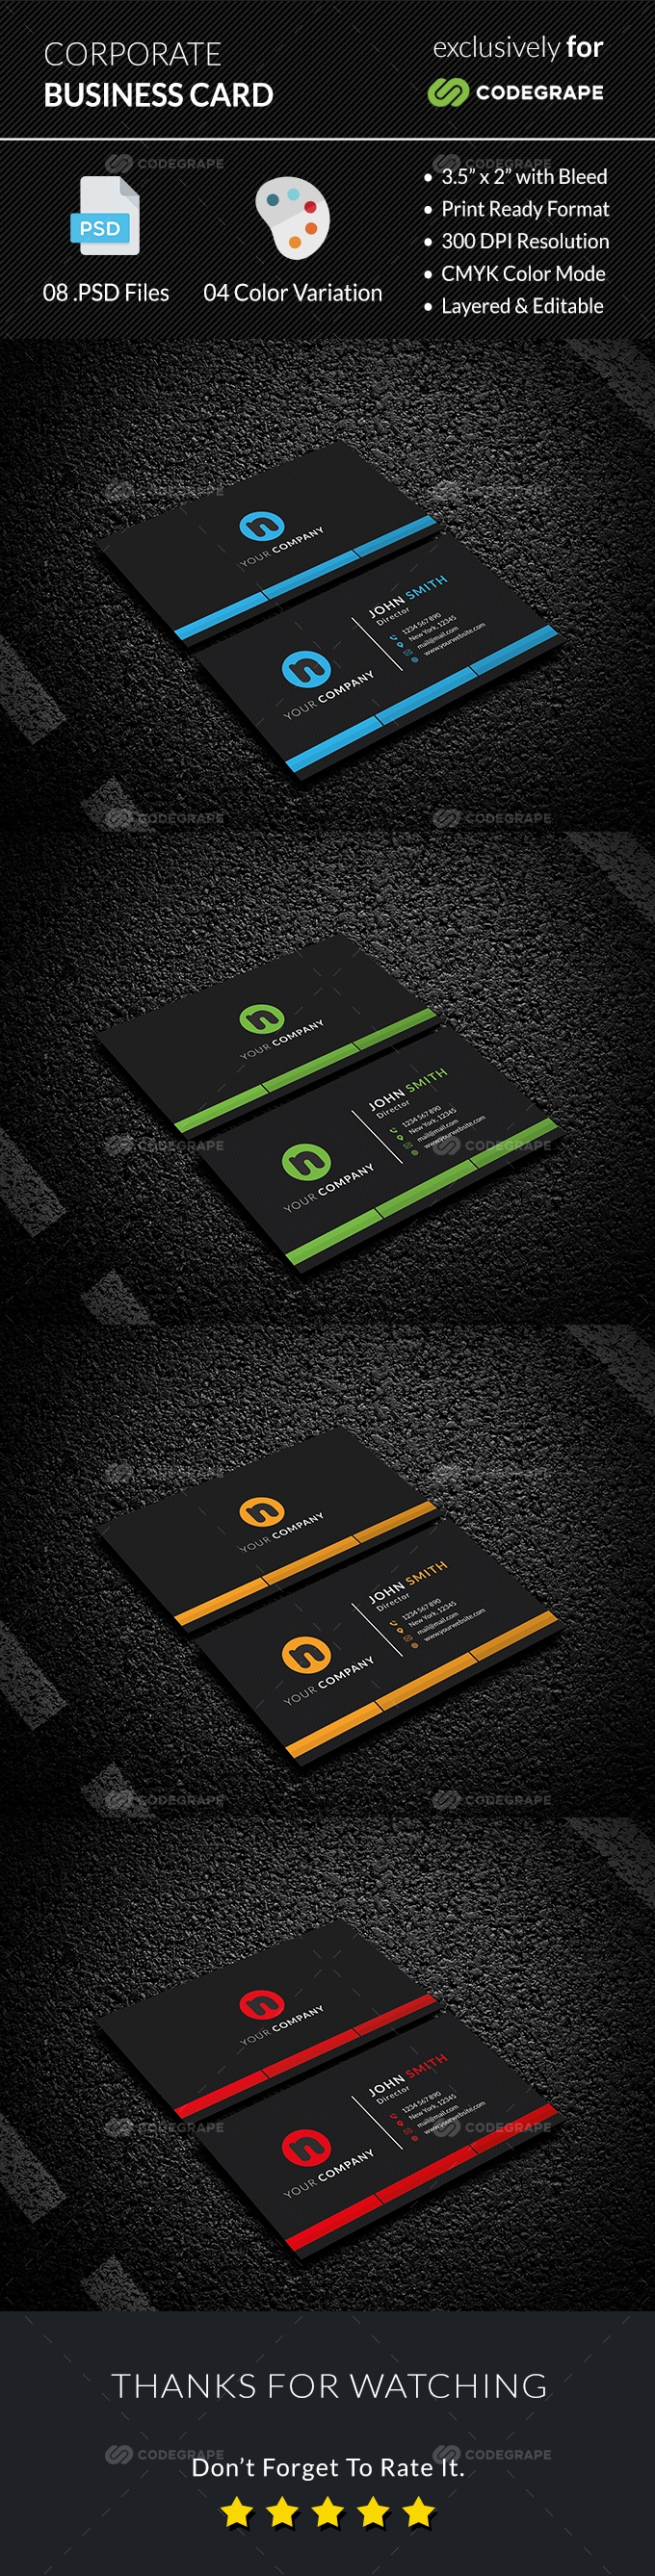 Corporate Business Card v.2